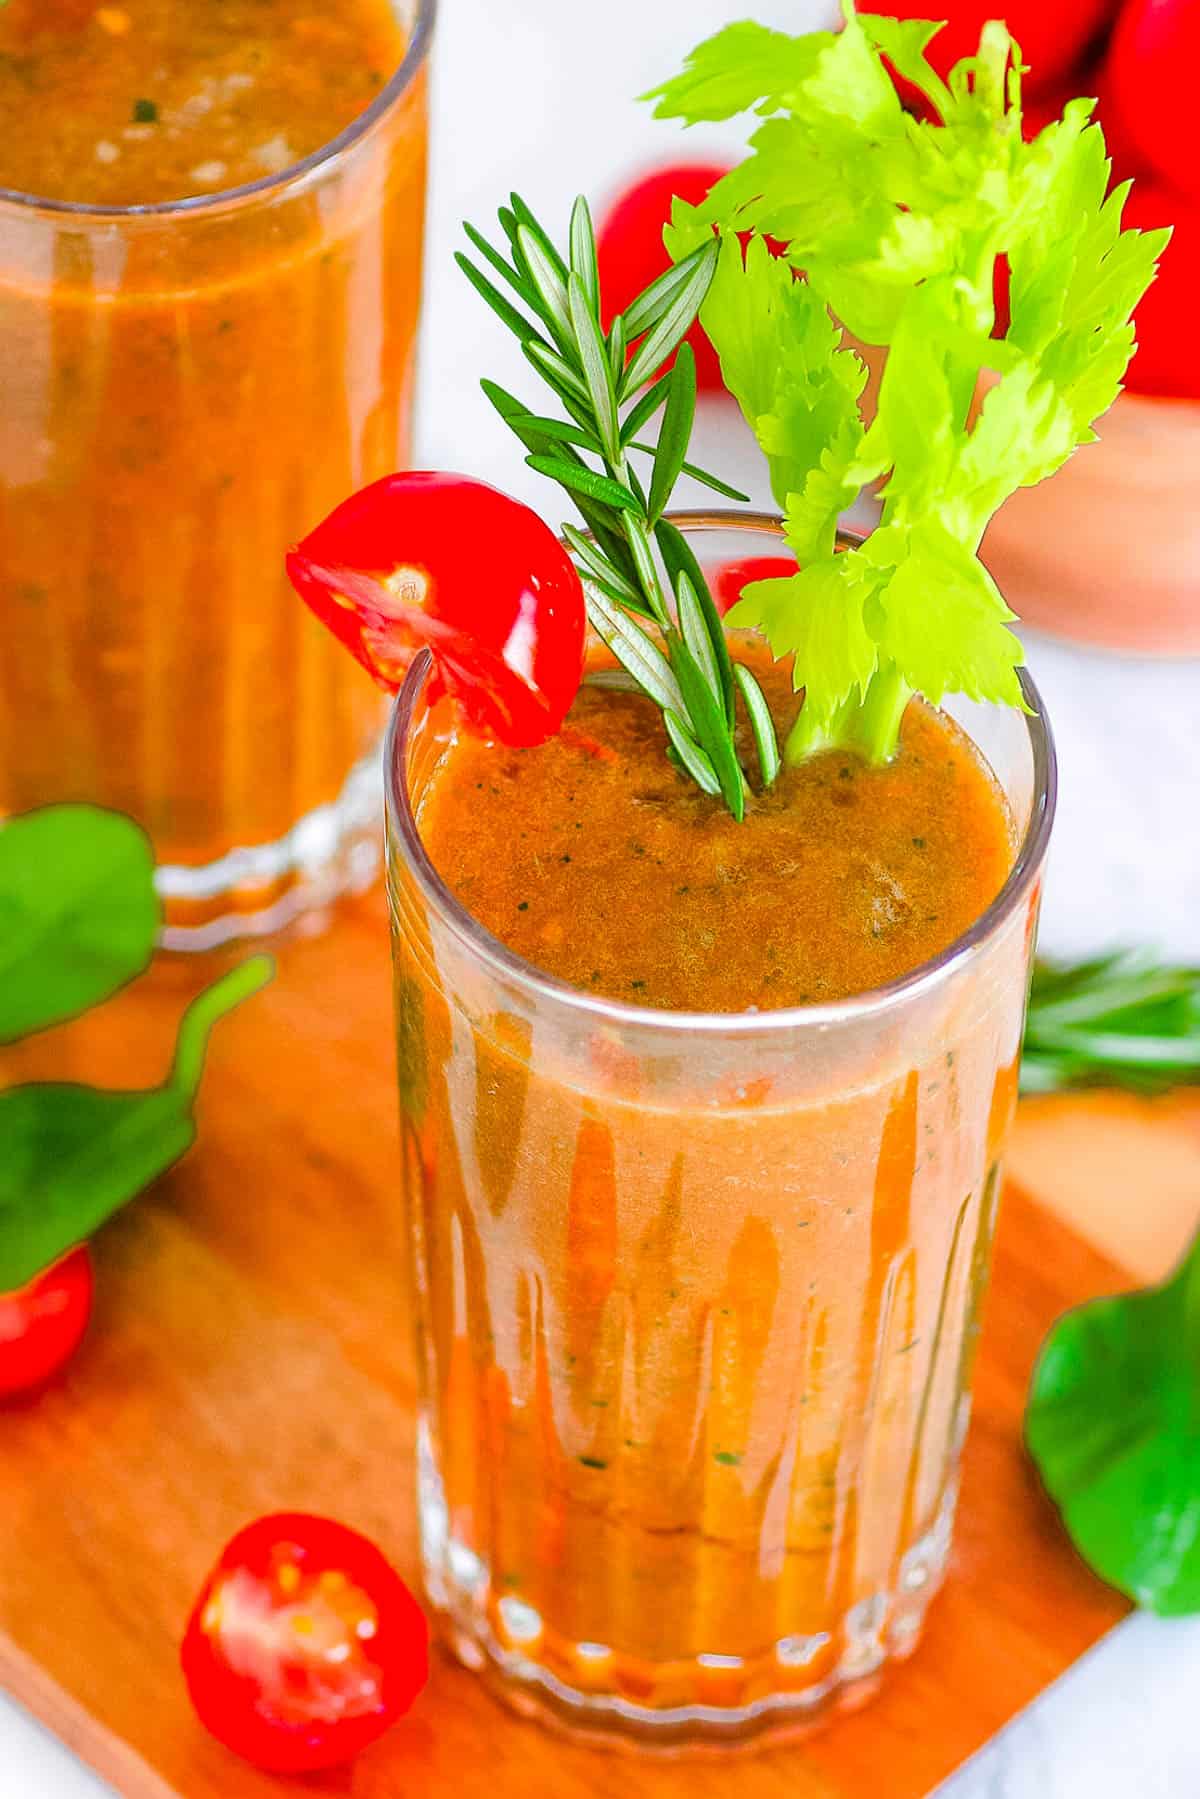 Savory tomato smoothie in a gl، garnished with celery and cherry tomatoes.